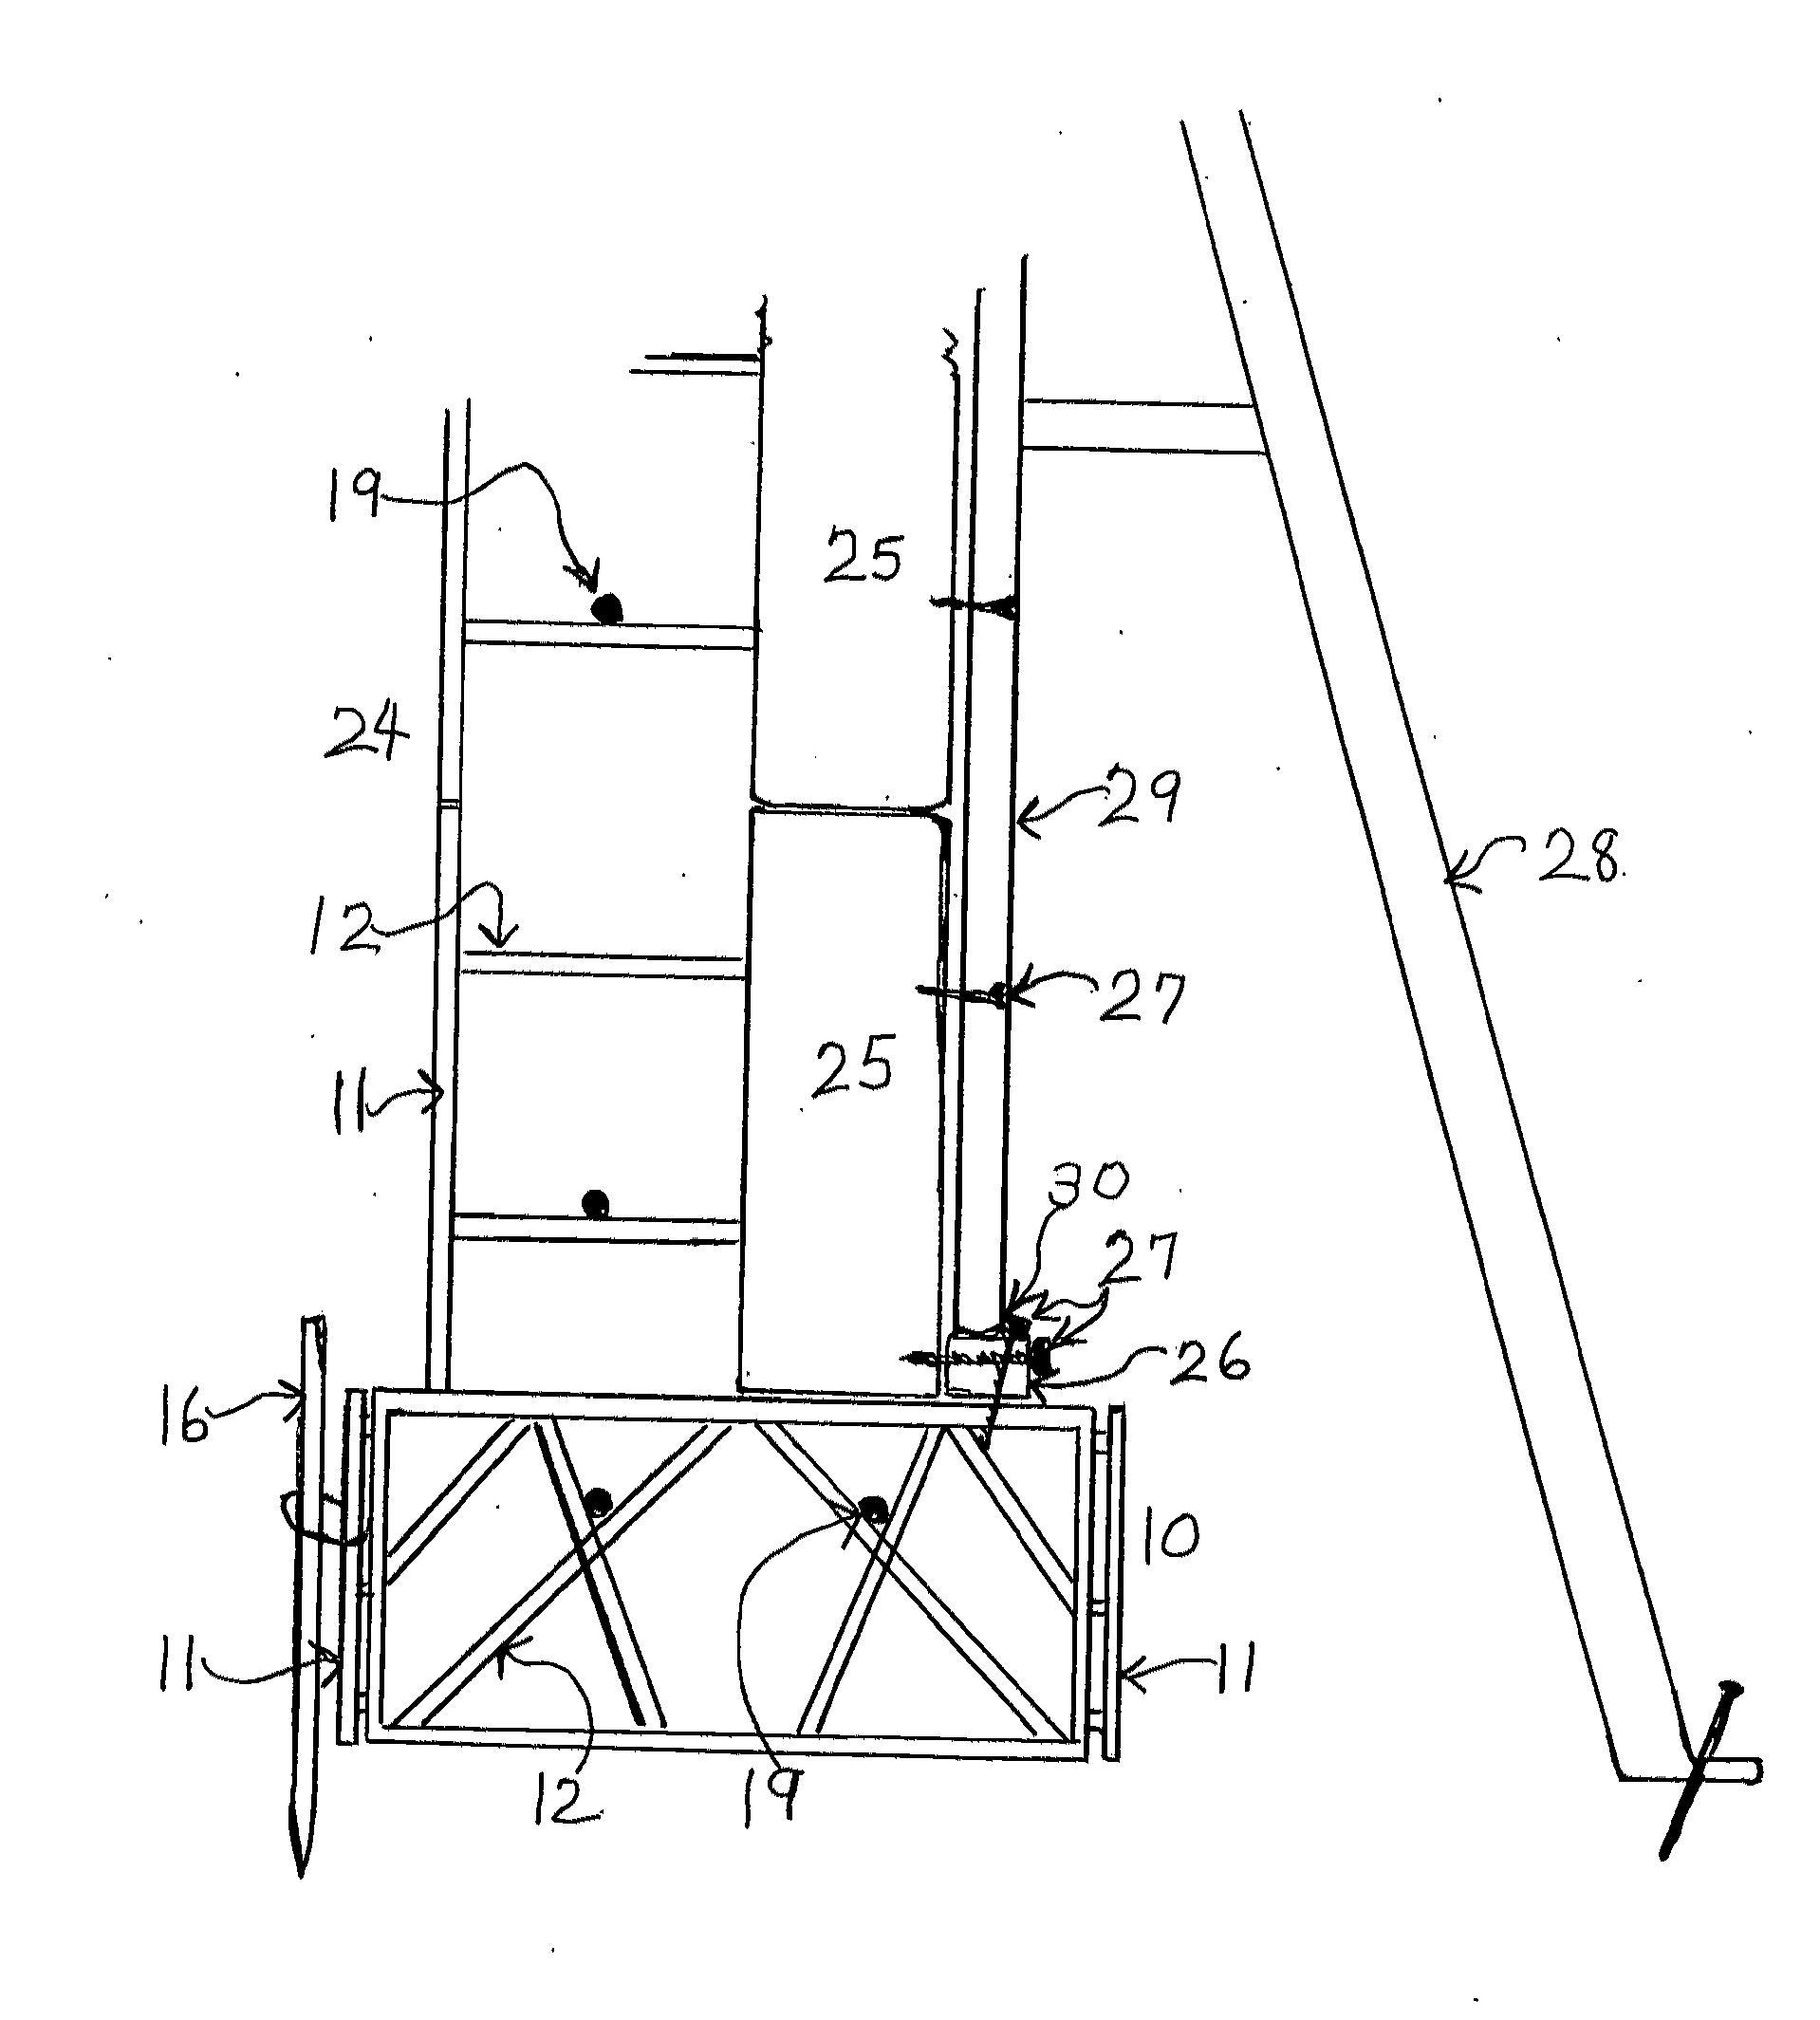 Manufactured assembly and method for forming concrete foundations and walls